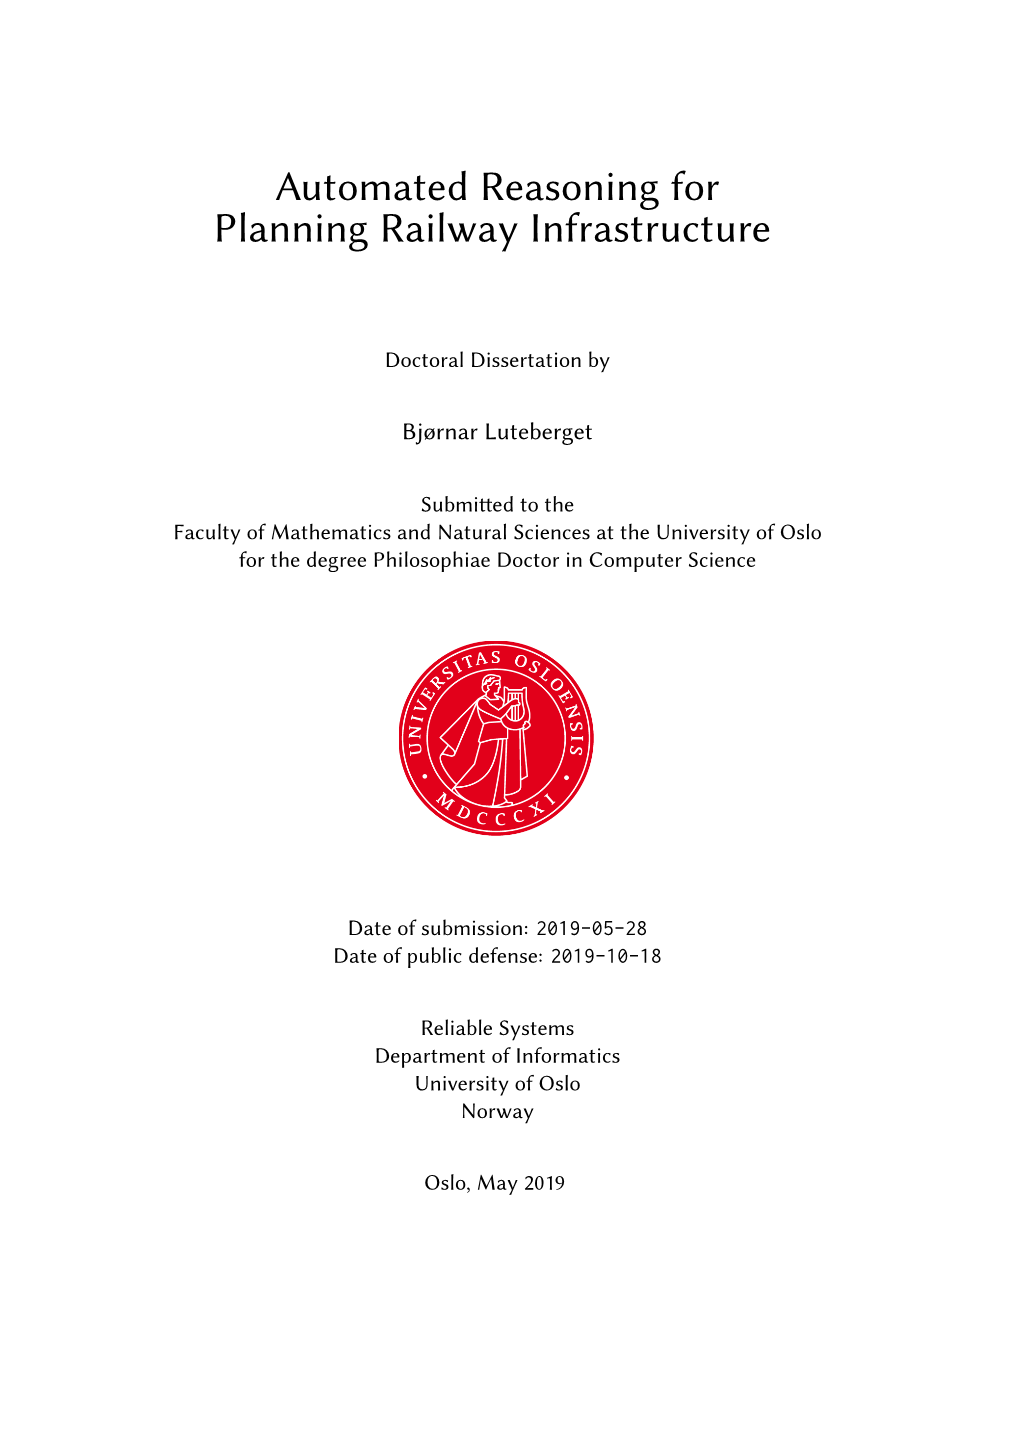 Automated Reasoning for Planning Railway Infrastructure